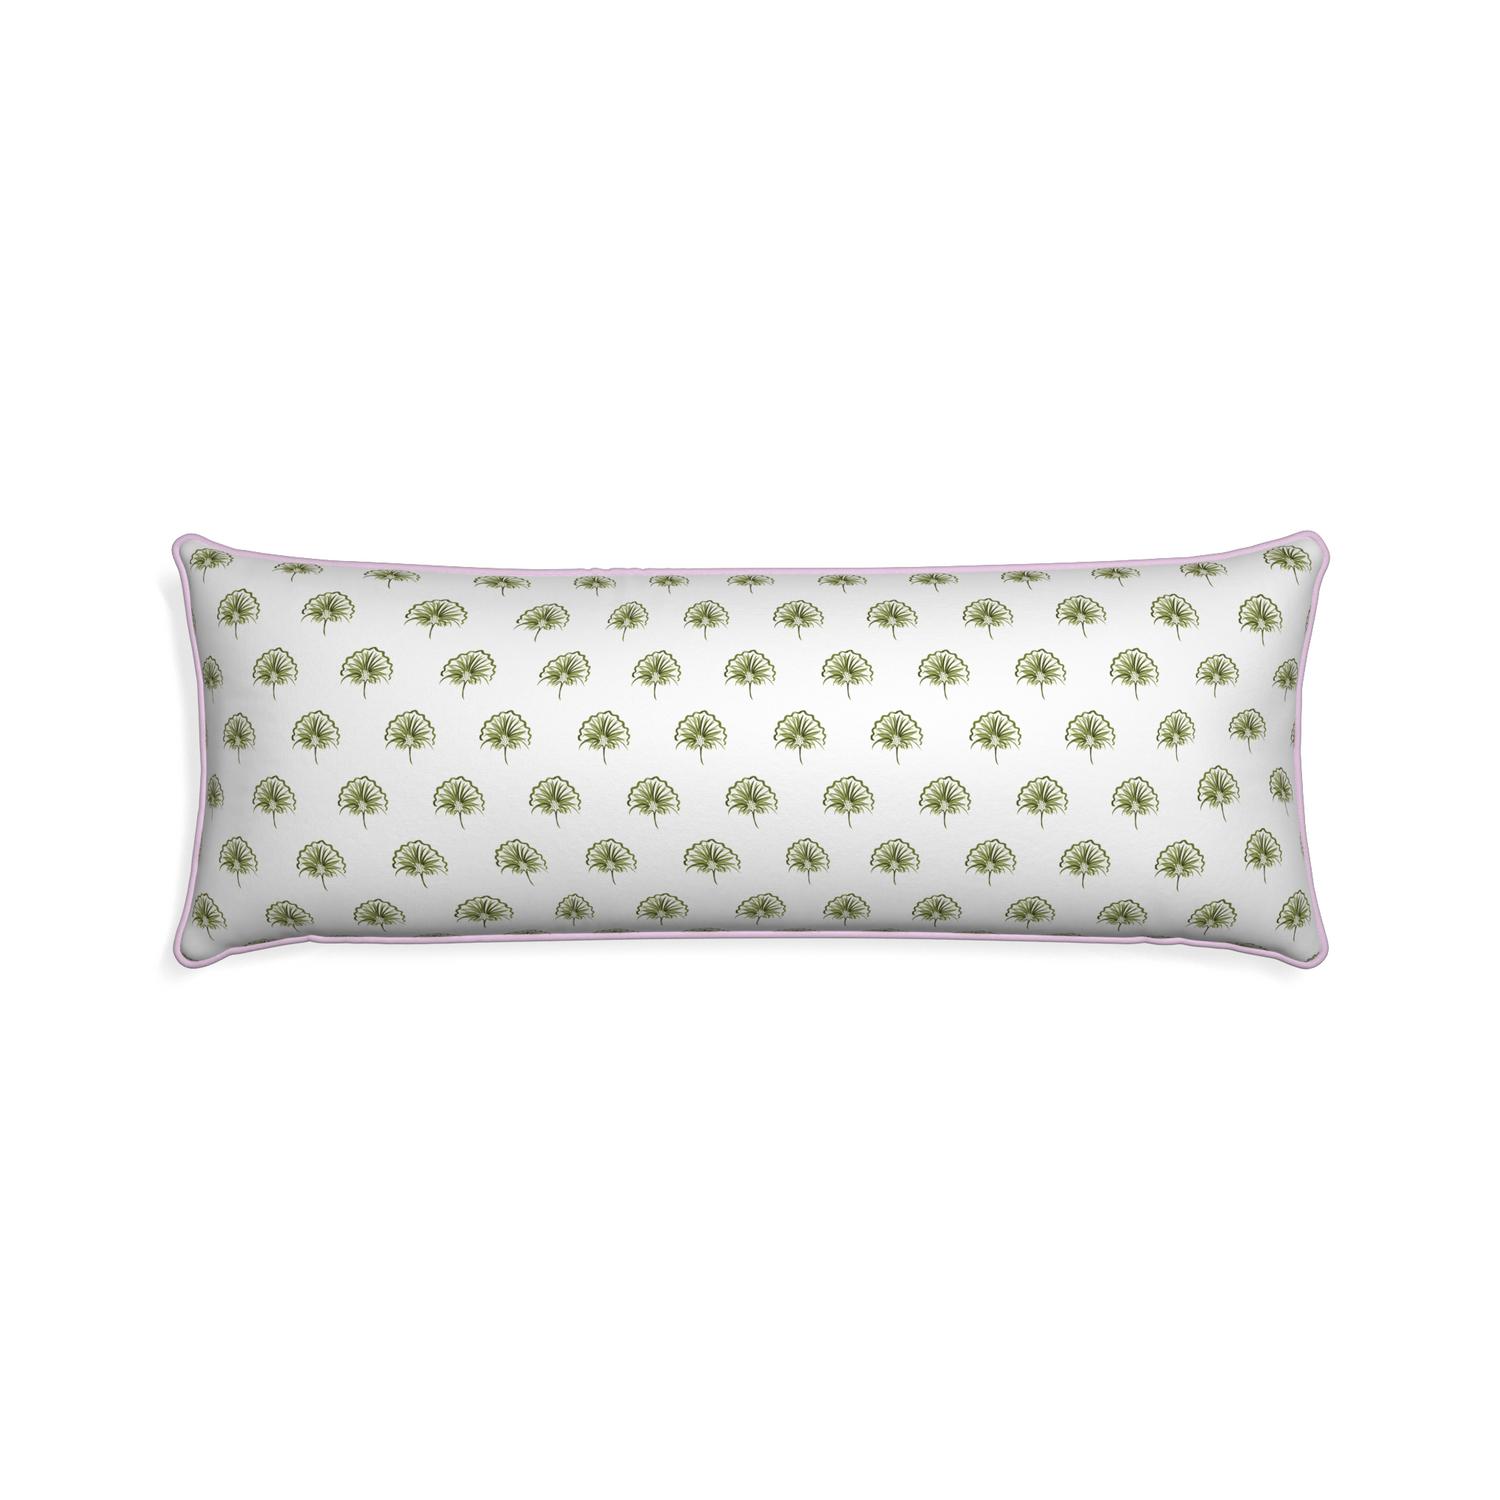 Xl-lumbar penelope moss custom pillow with l piping on white background